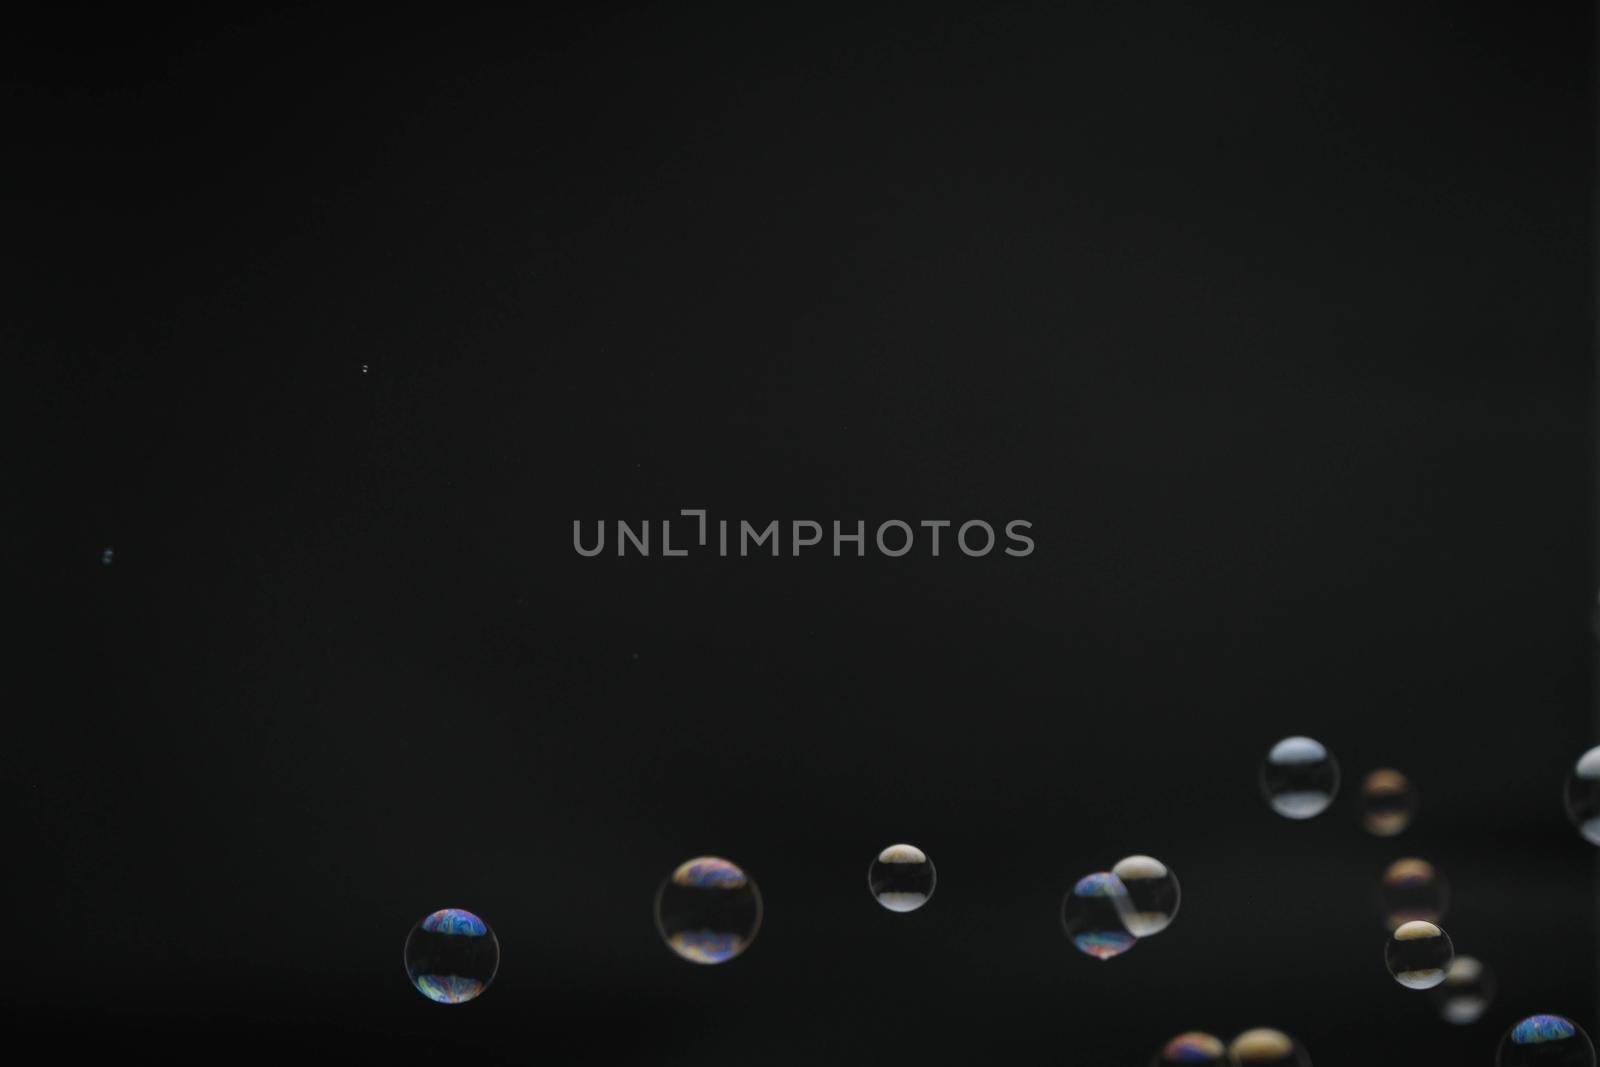 Flying soap bubbles on black background. Abstract soap bubbles with colorful reflections. Soap bubbles in motion background.